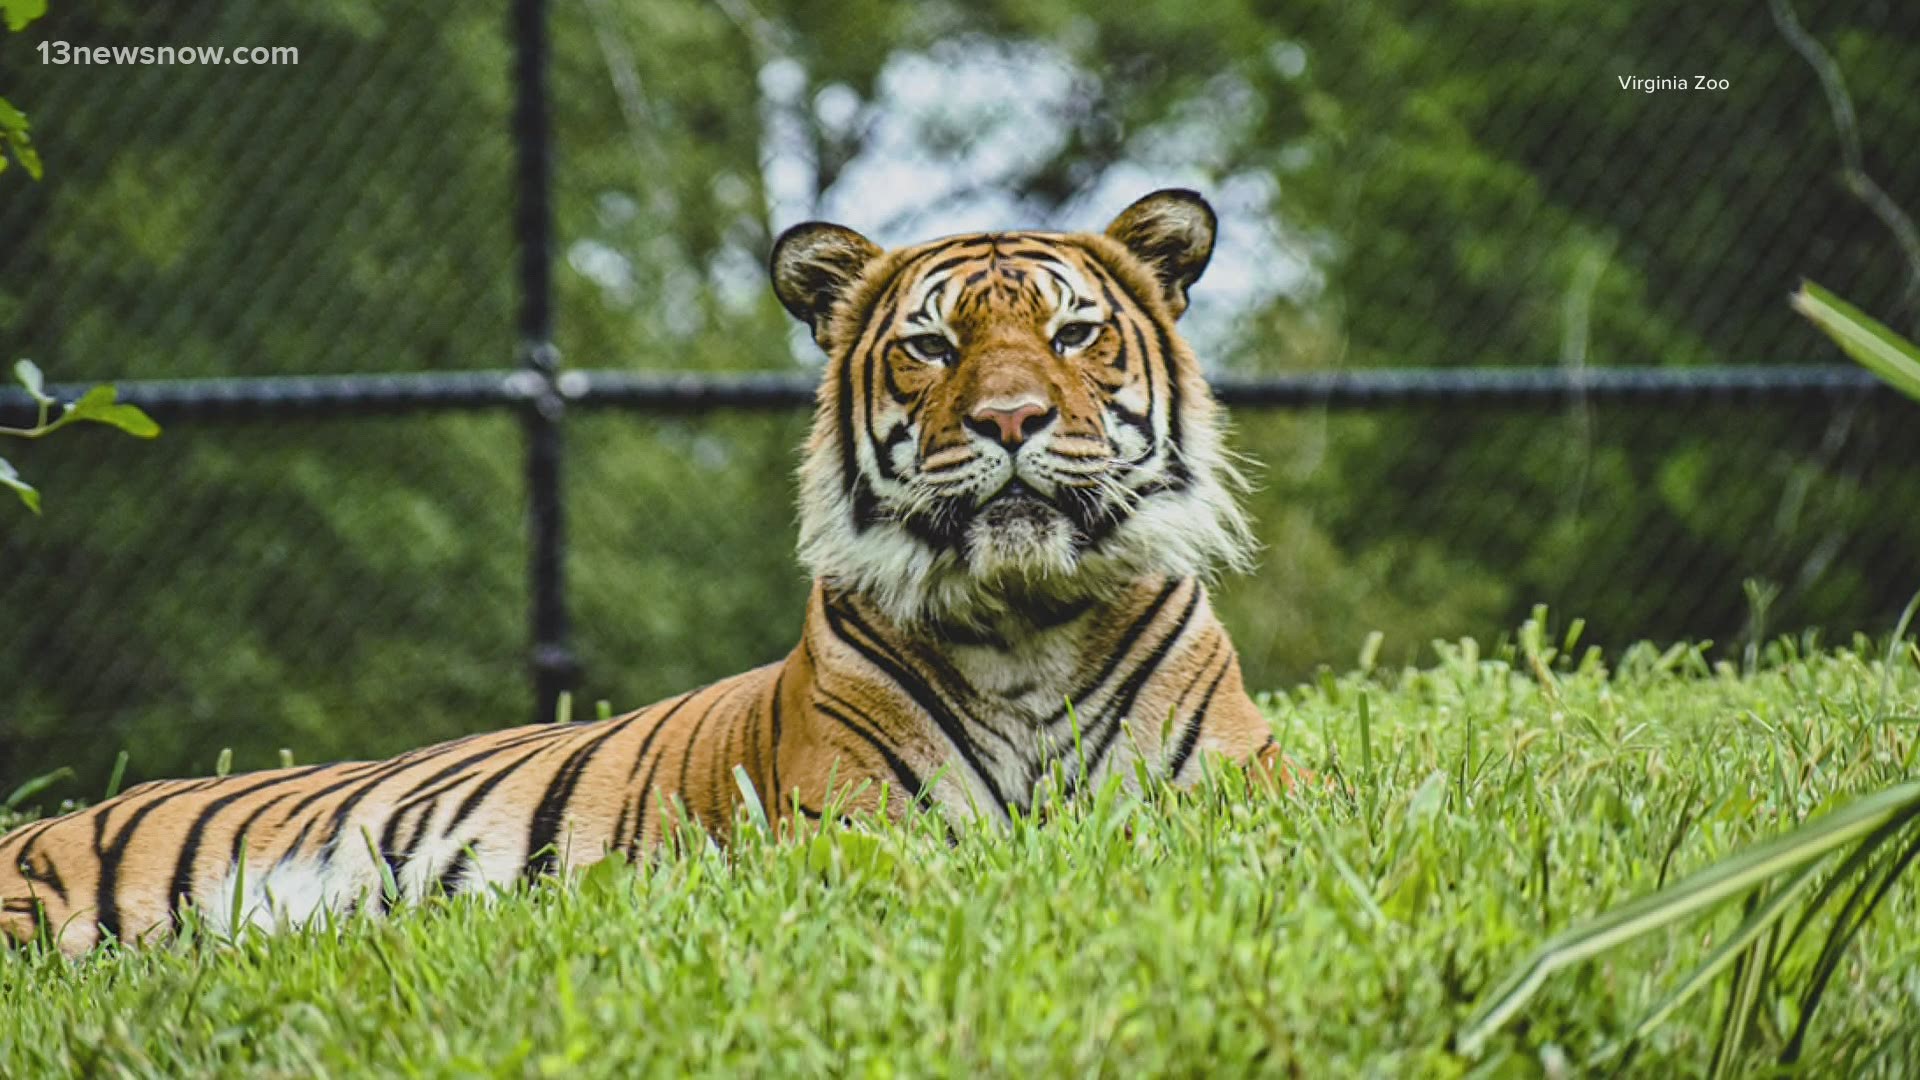 Stubbley and Osceola were tested after caretakers noticed them wheezing and coughing. They were taken out of exhibit, but they're expected to make a full recovery.